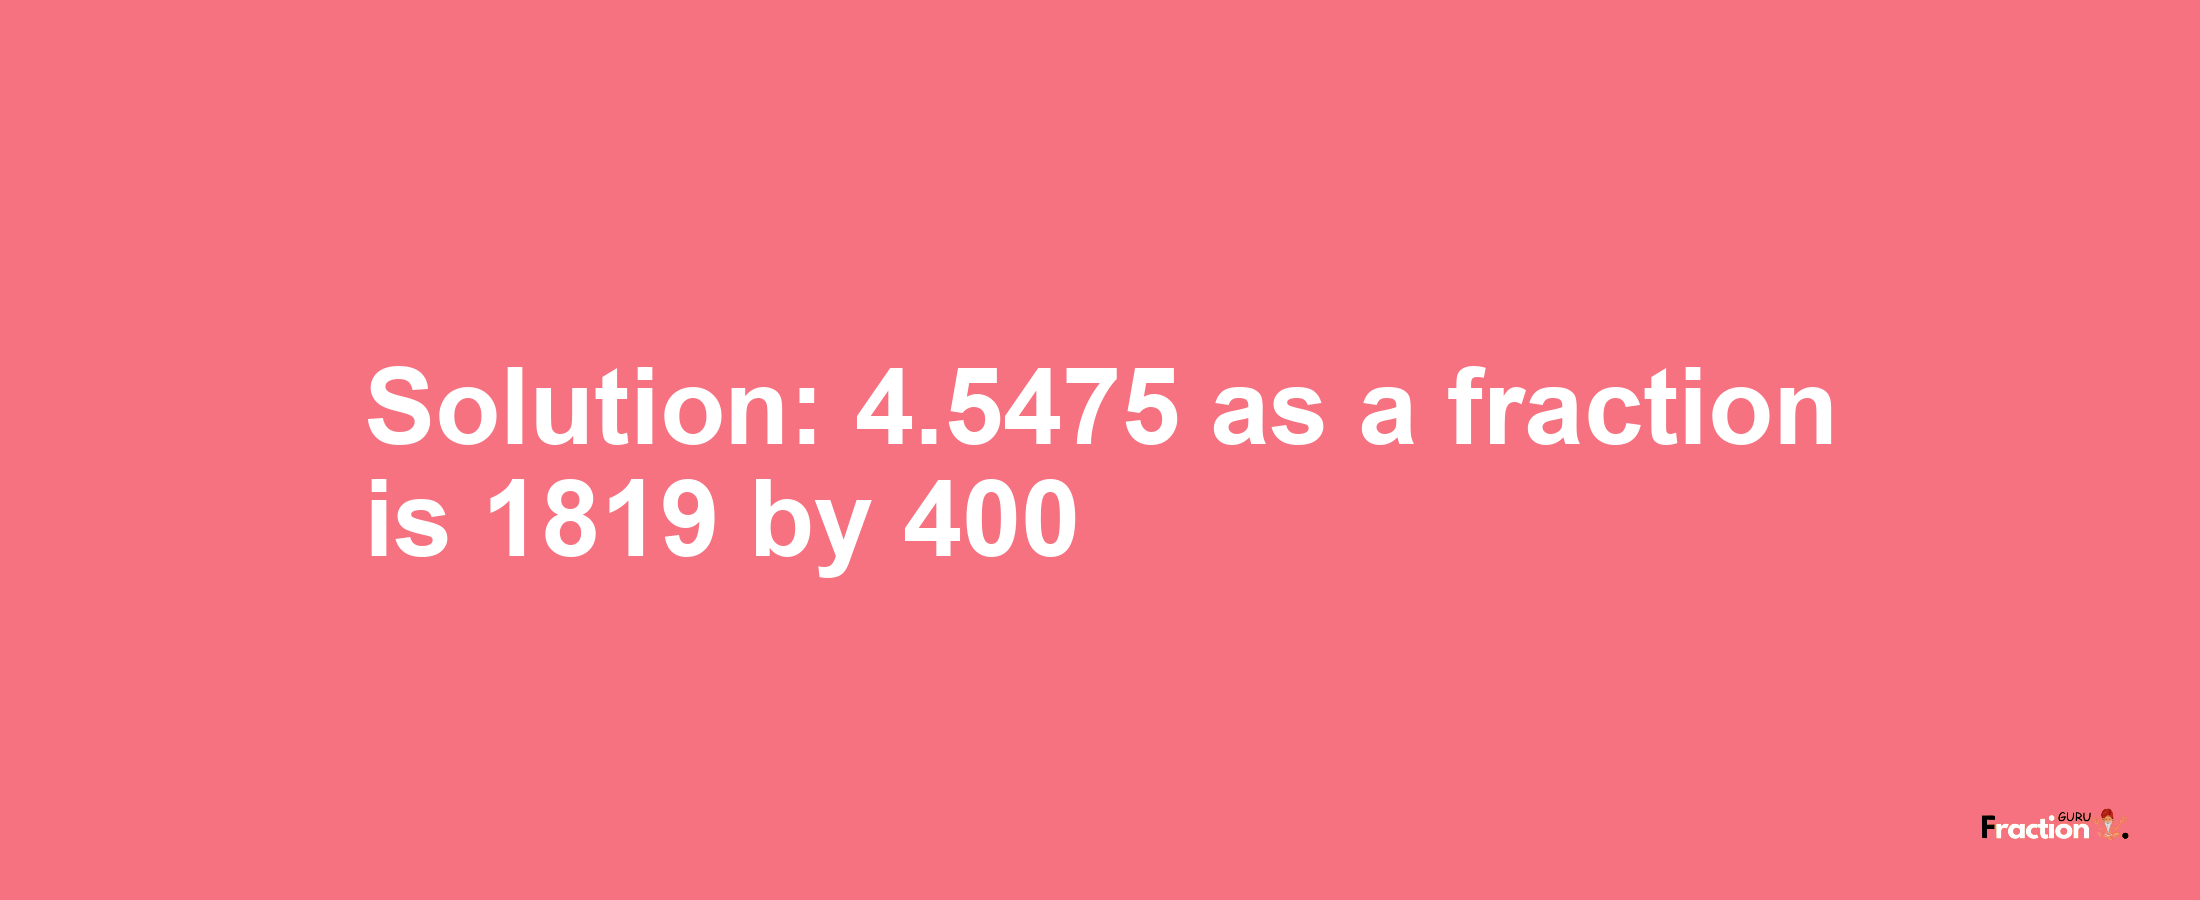 Solution:4.5475 as a fraction is 1819/400